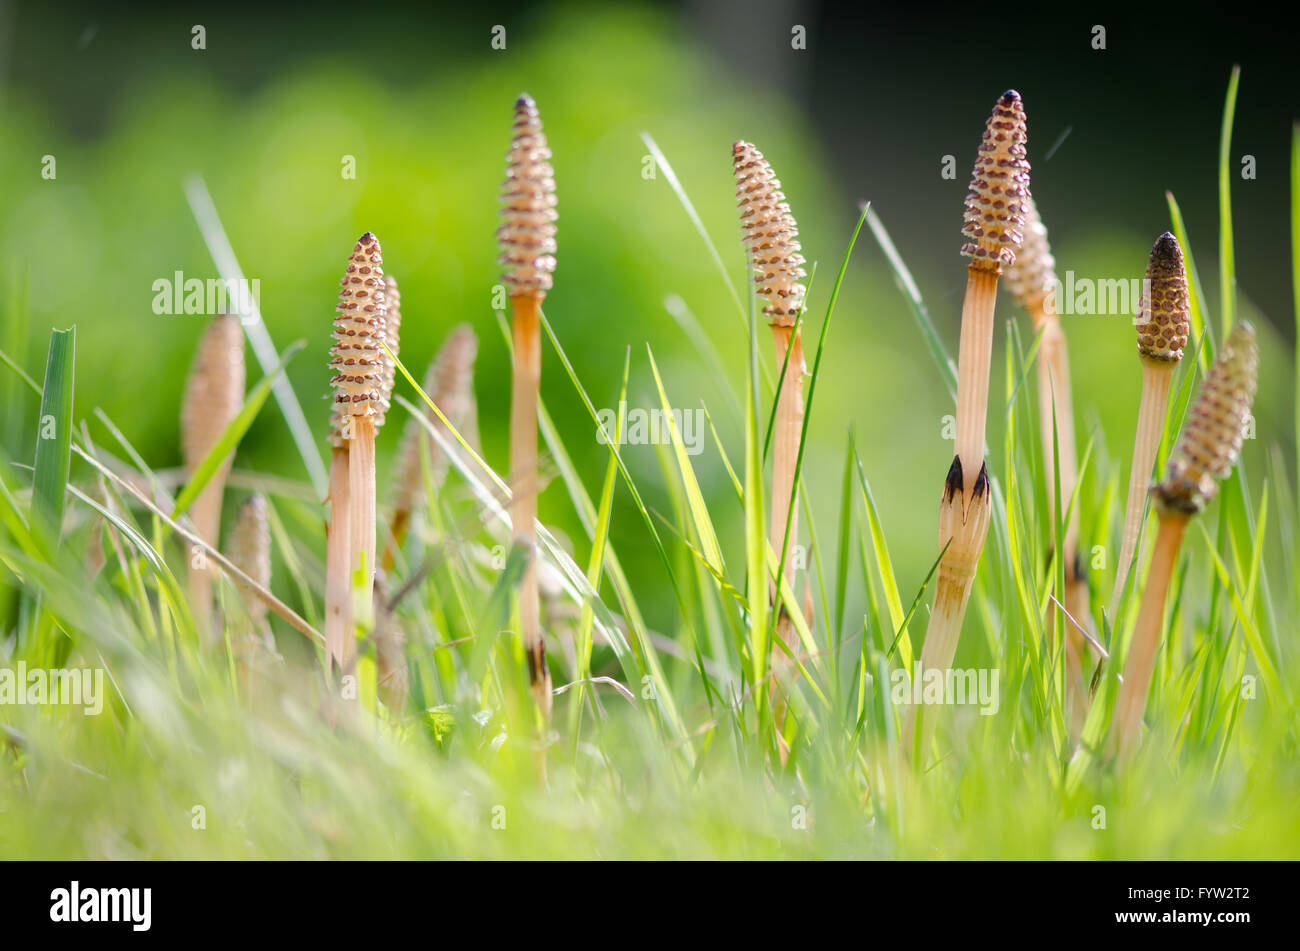 Field horsetail (Equisetum arvense). Fertile stems on this plant in the family Equisetaceae, growing amongst grass in the UK Stock Photo